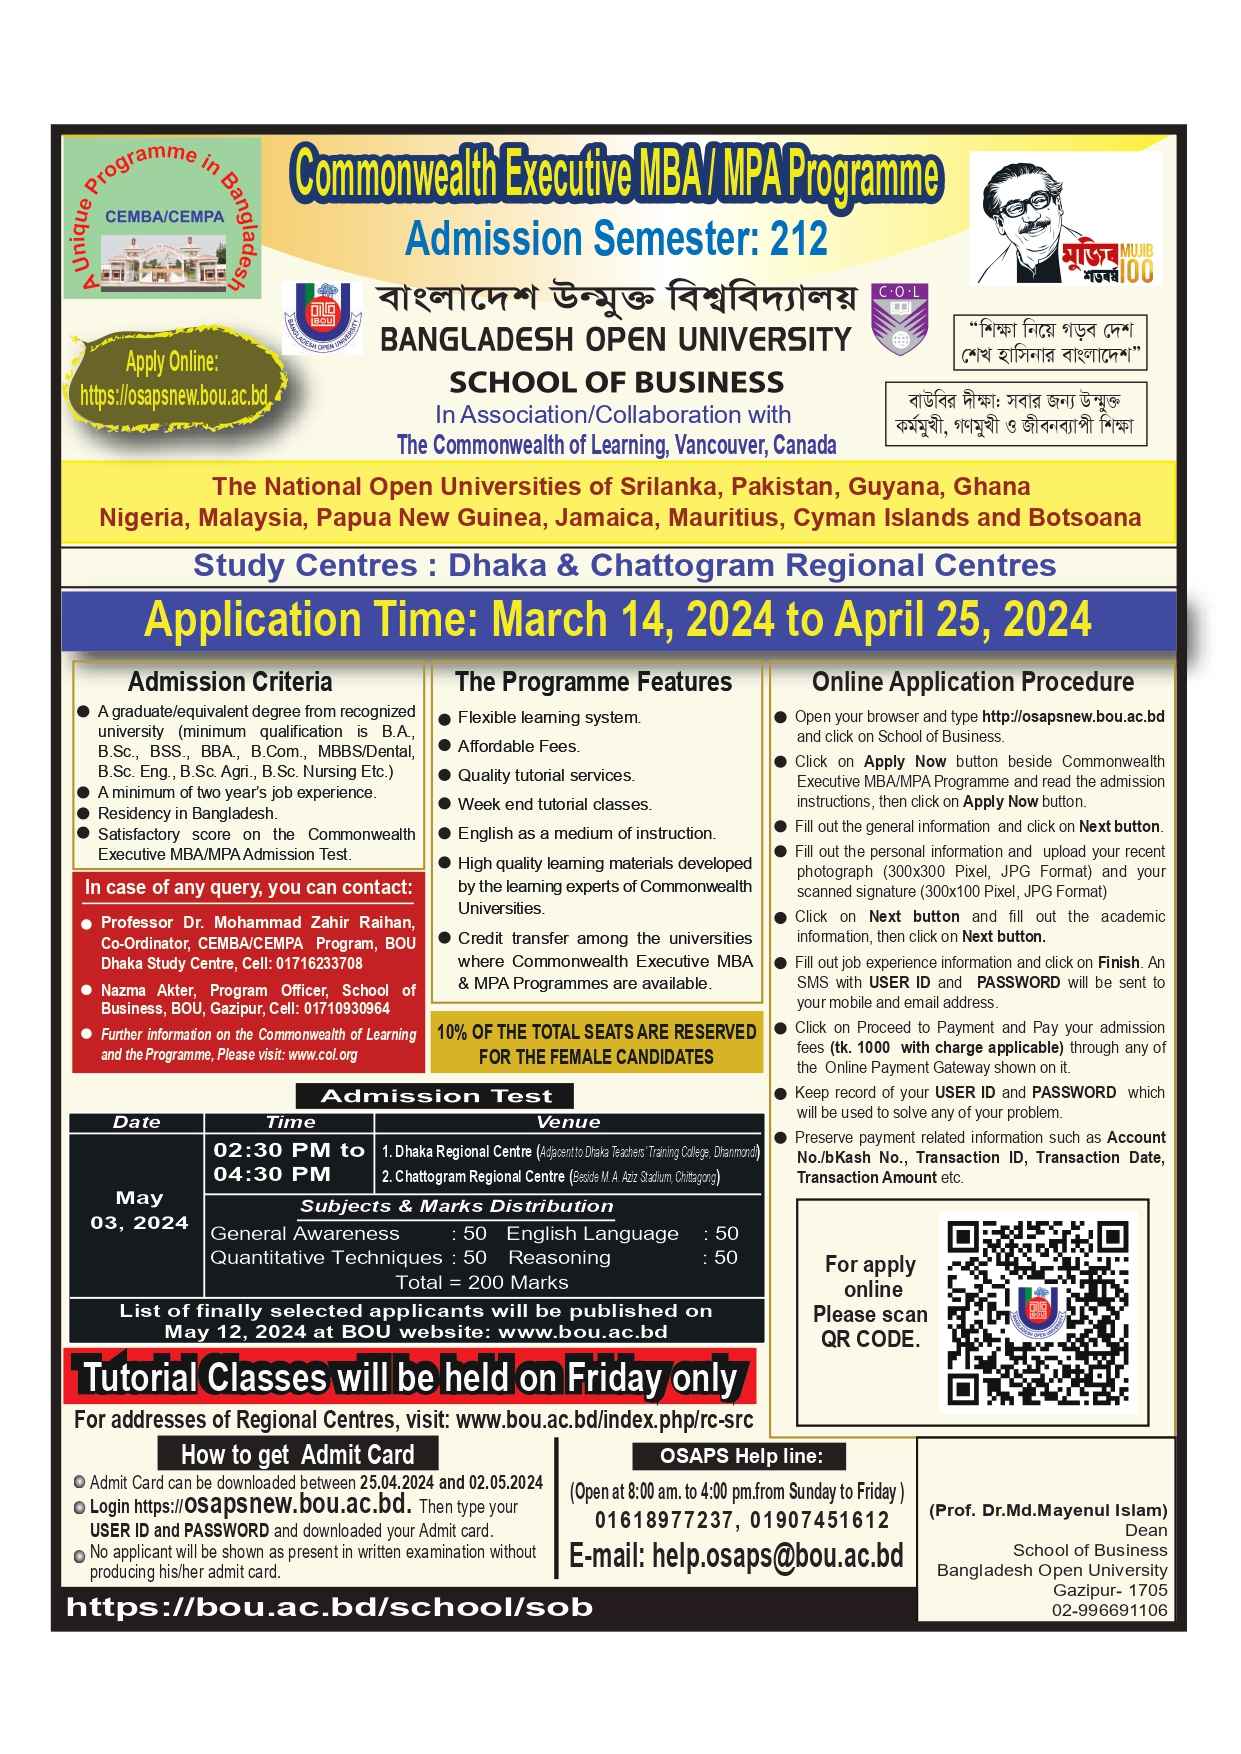 Admission for Commonwealth Executive MBA in Bangladesh Open University